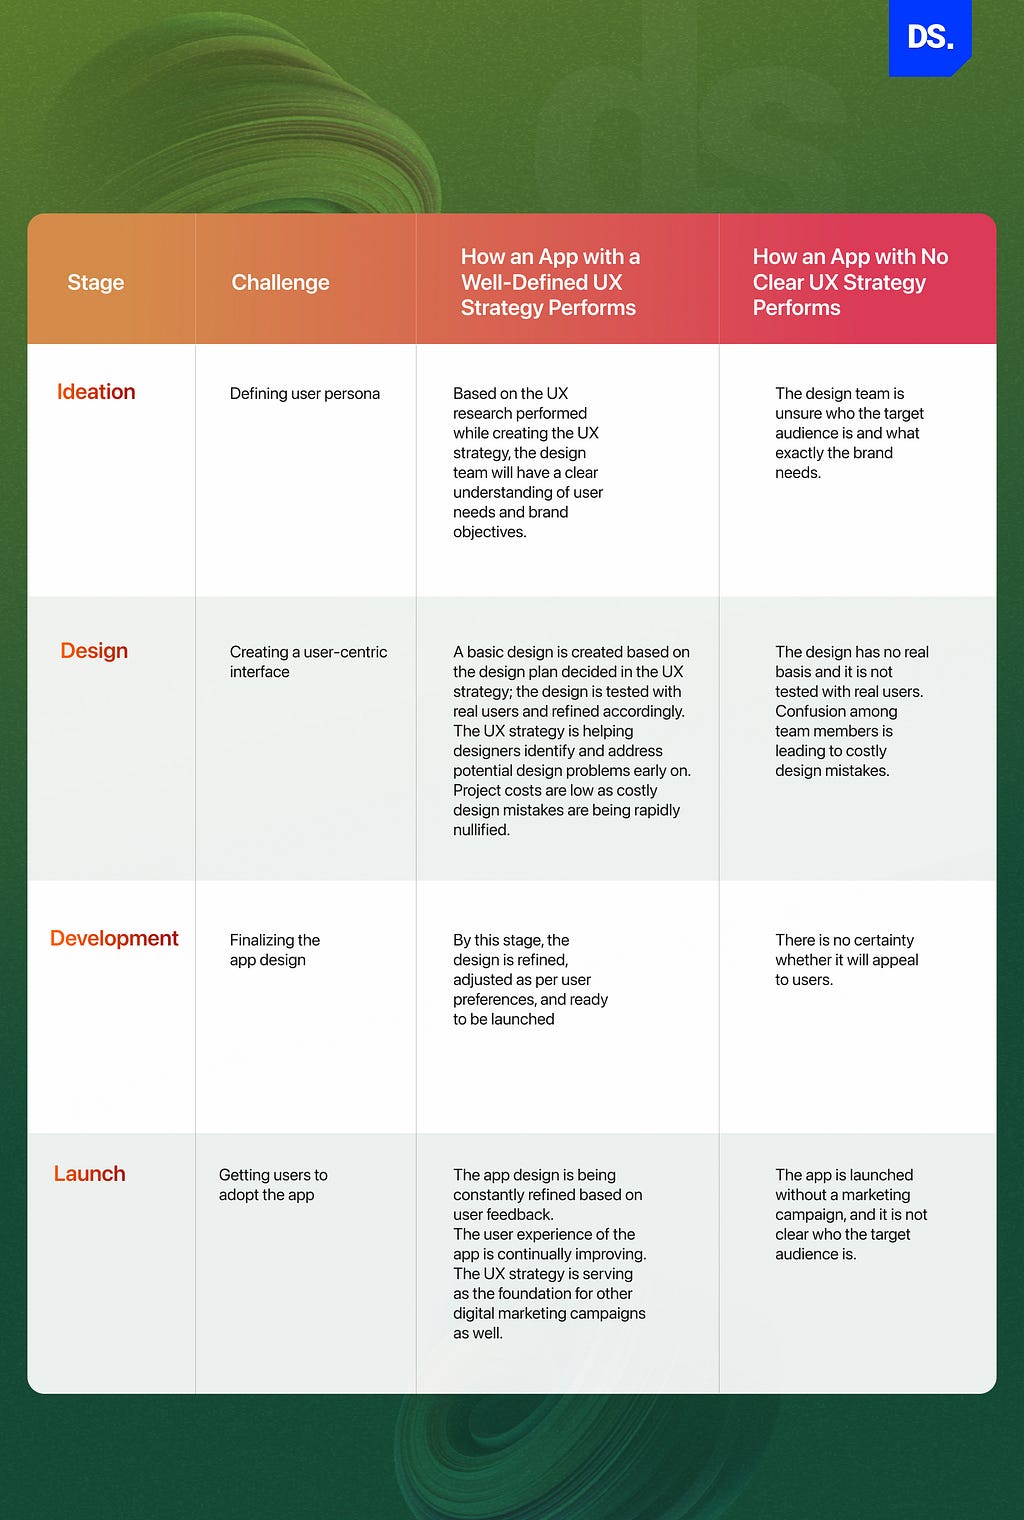 Chart showing challenges during different stages of the app design and development process.